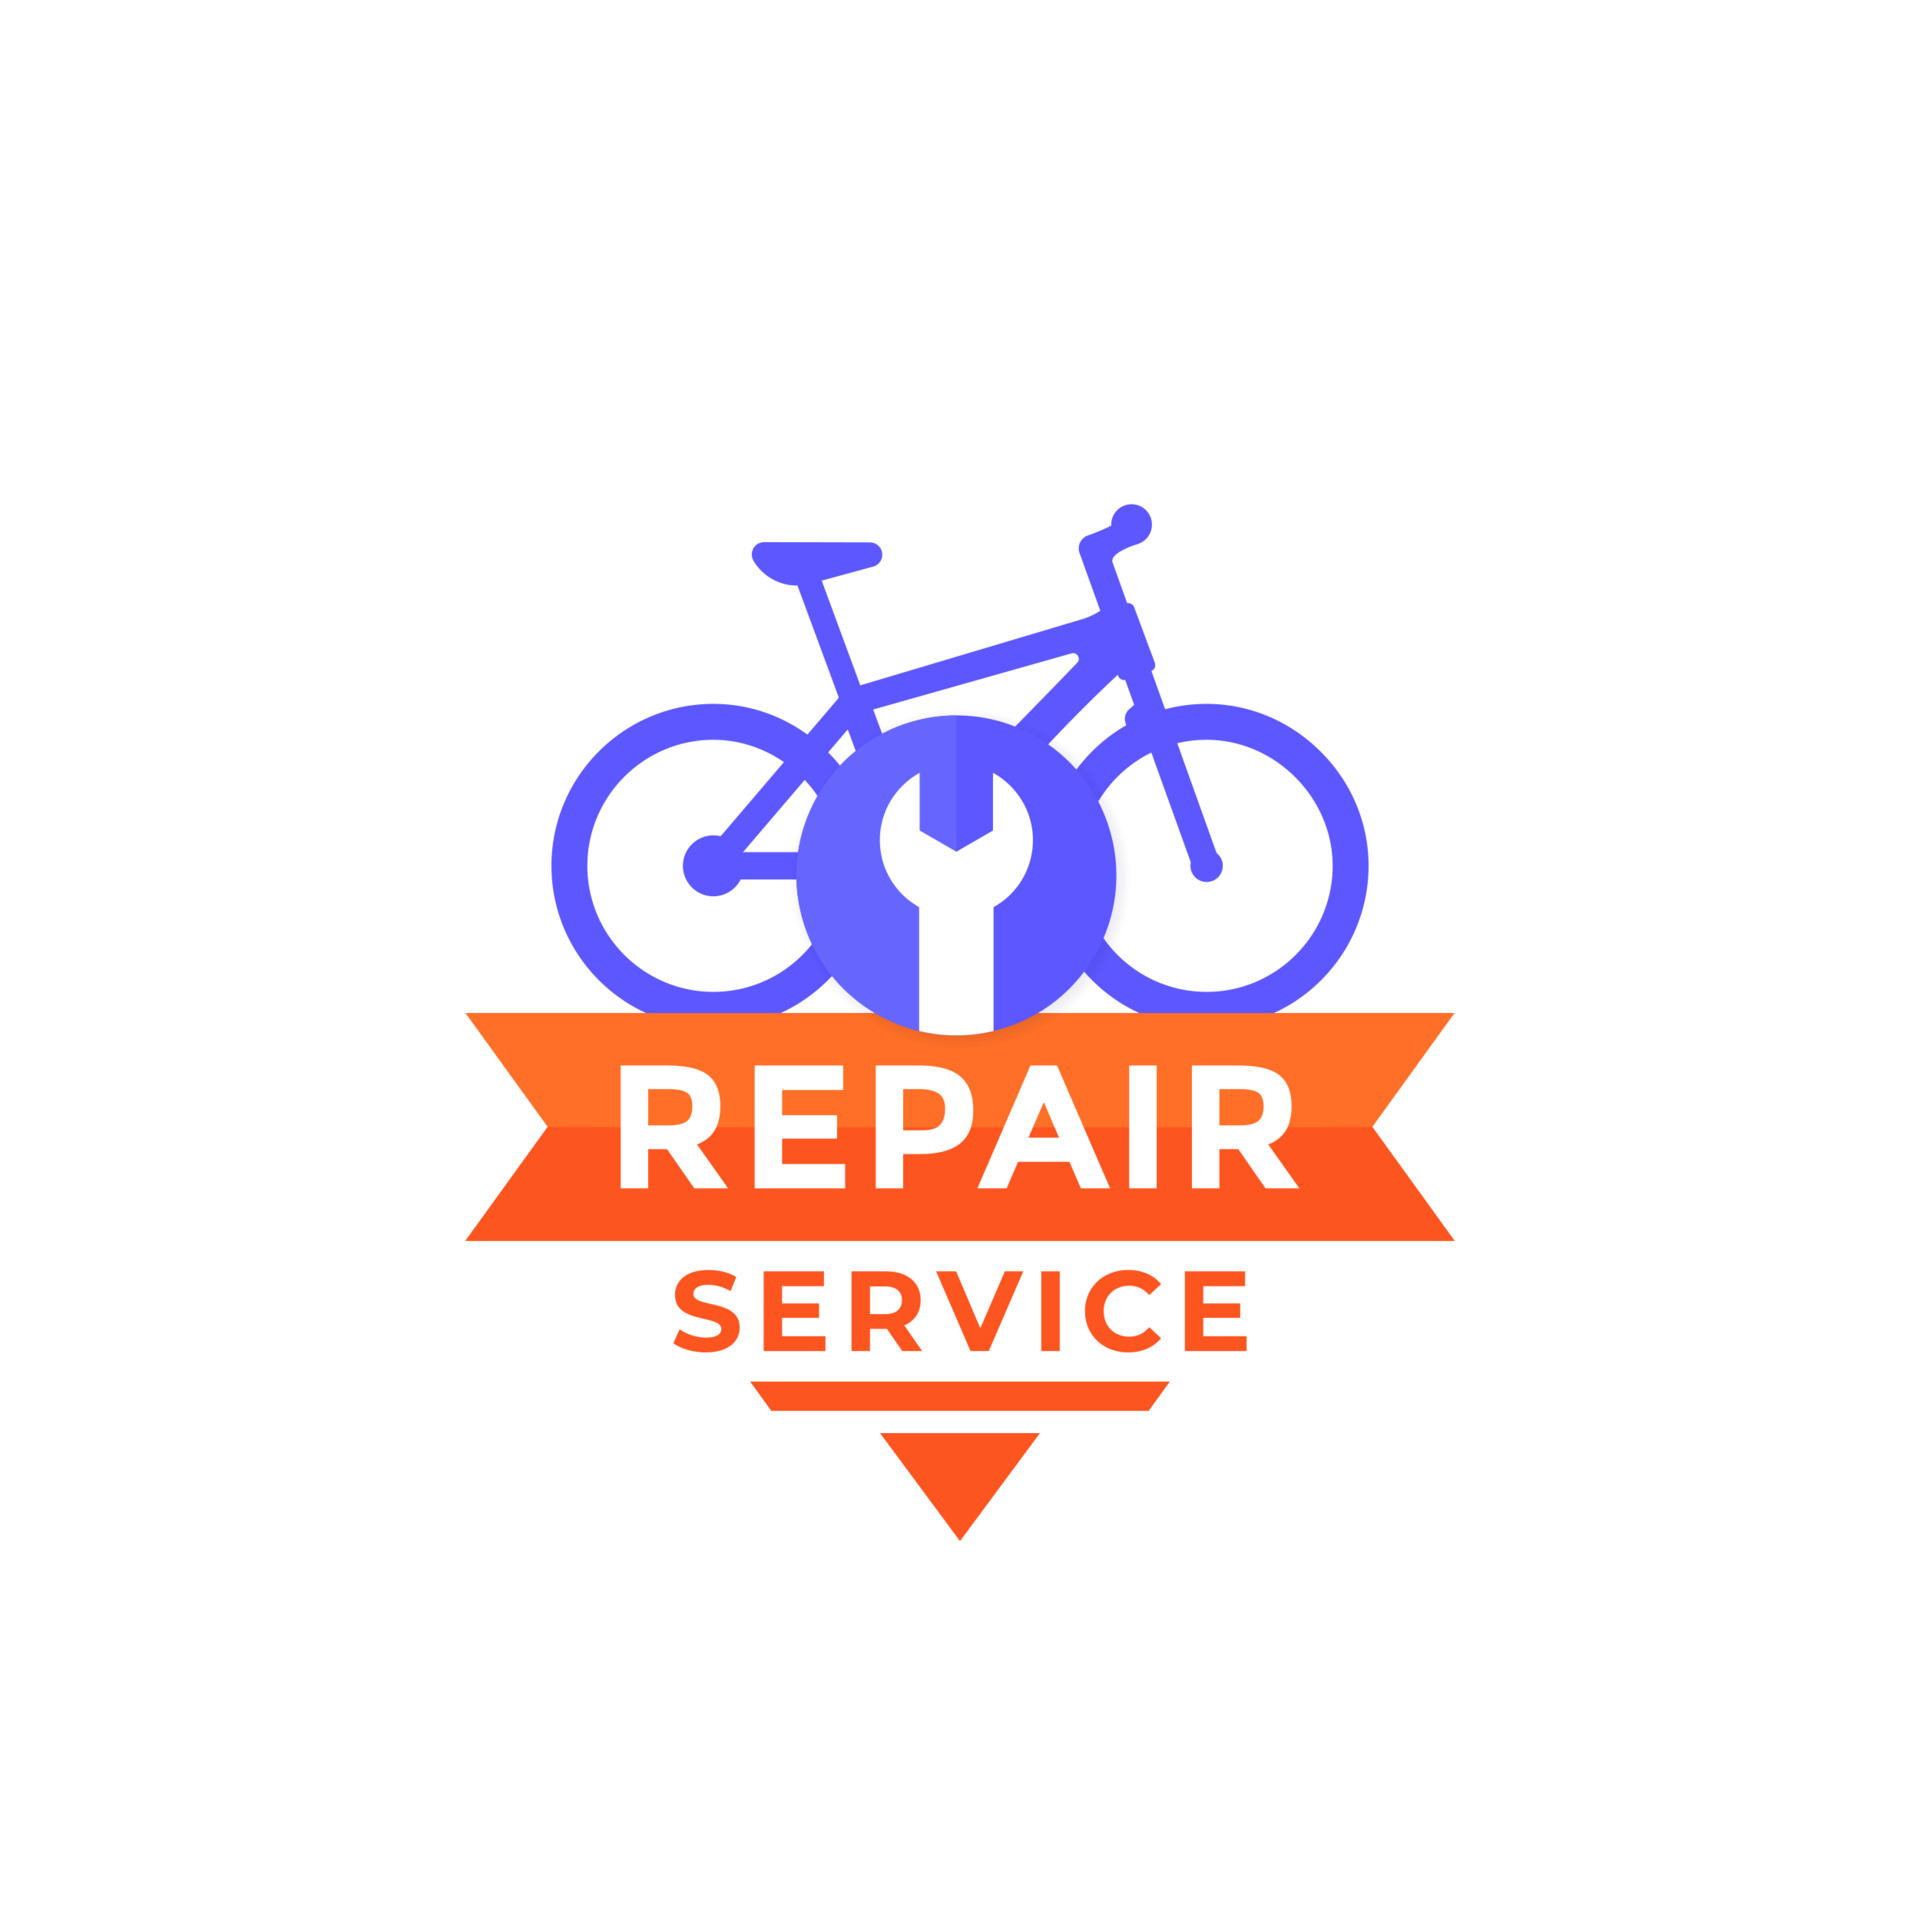 Do awesome bicycle service logo for you with my own creativity by  Nick_schmidt | Fiverr